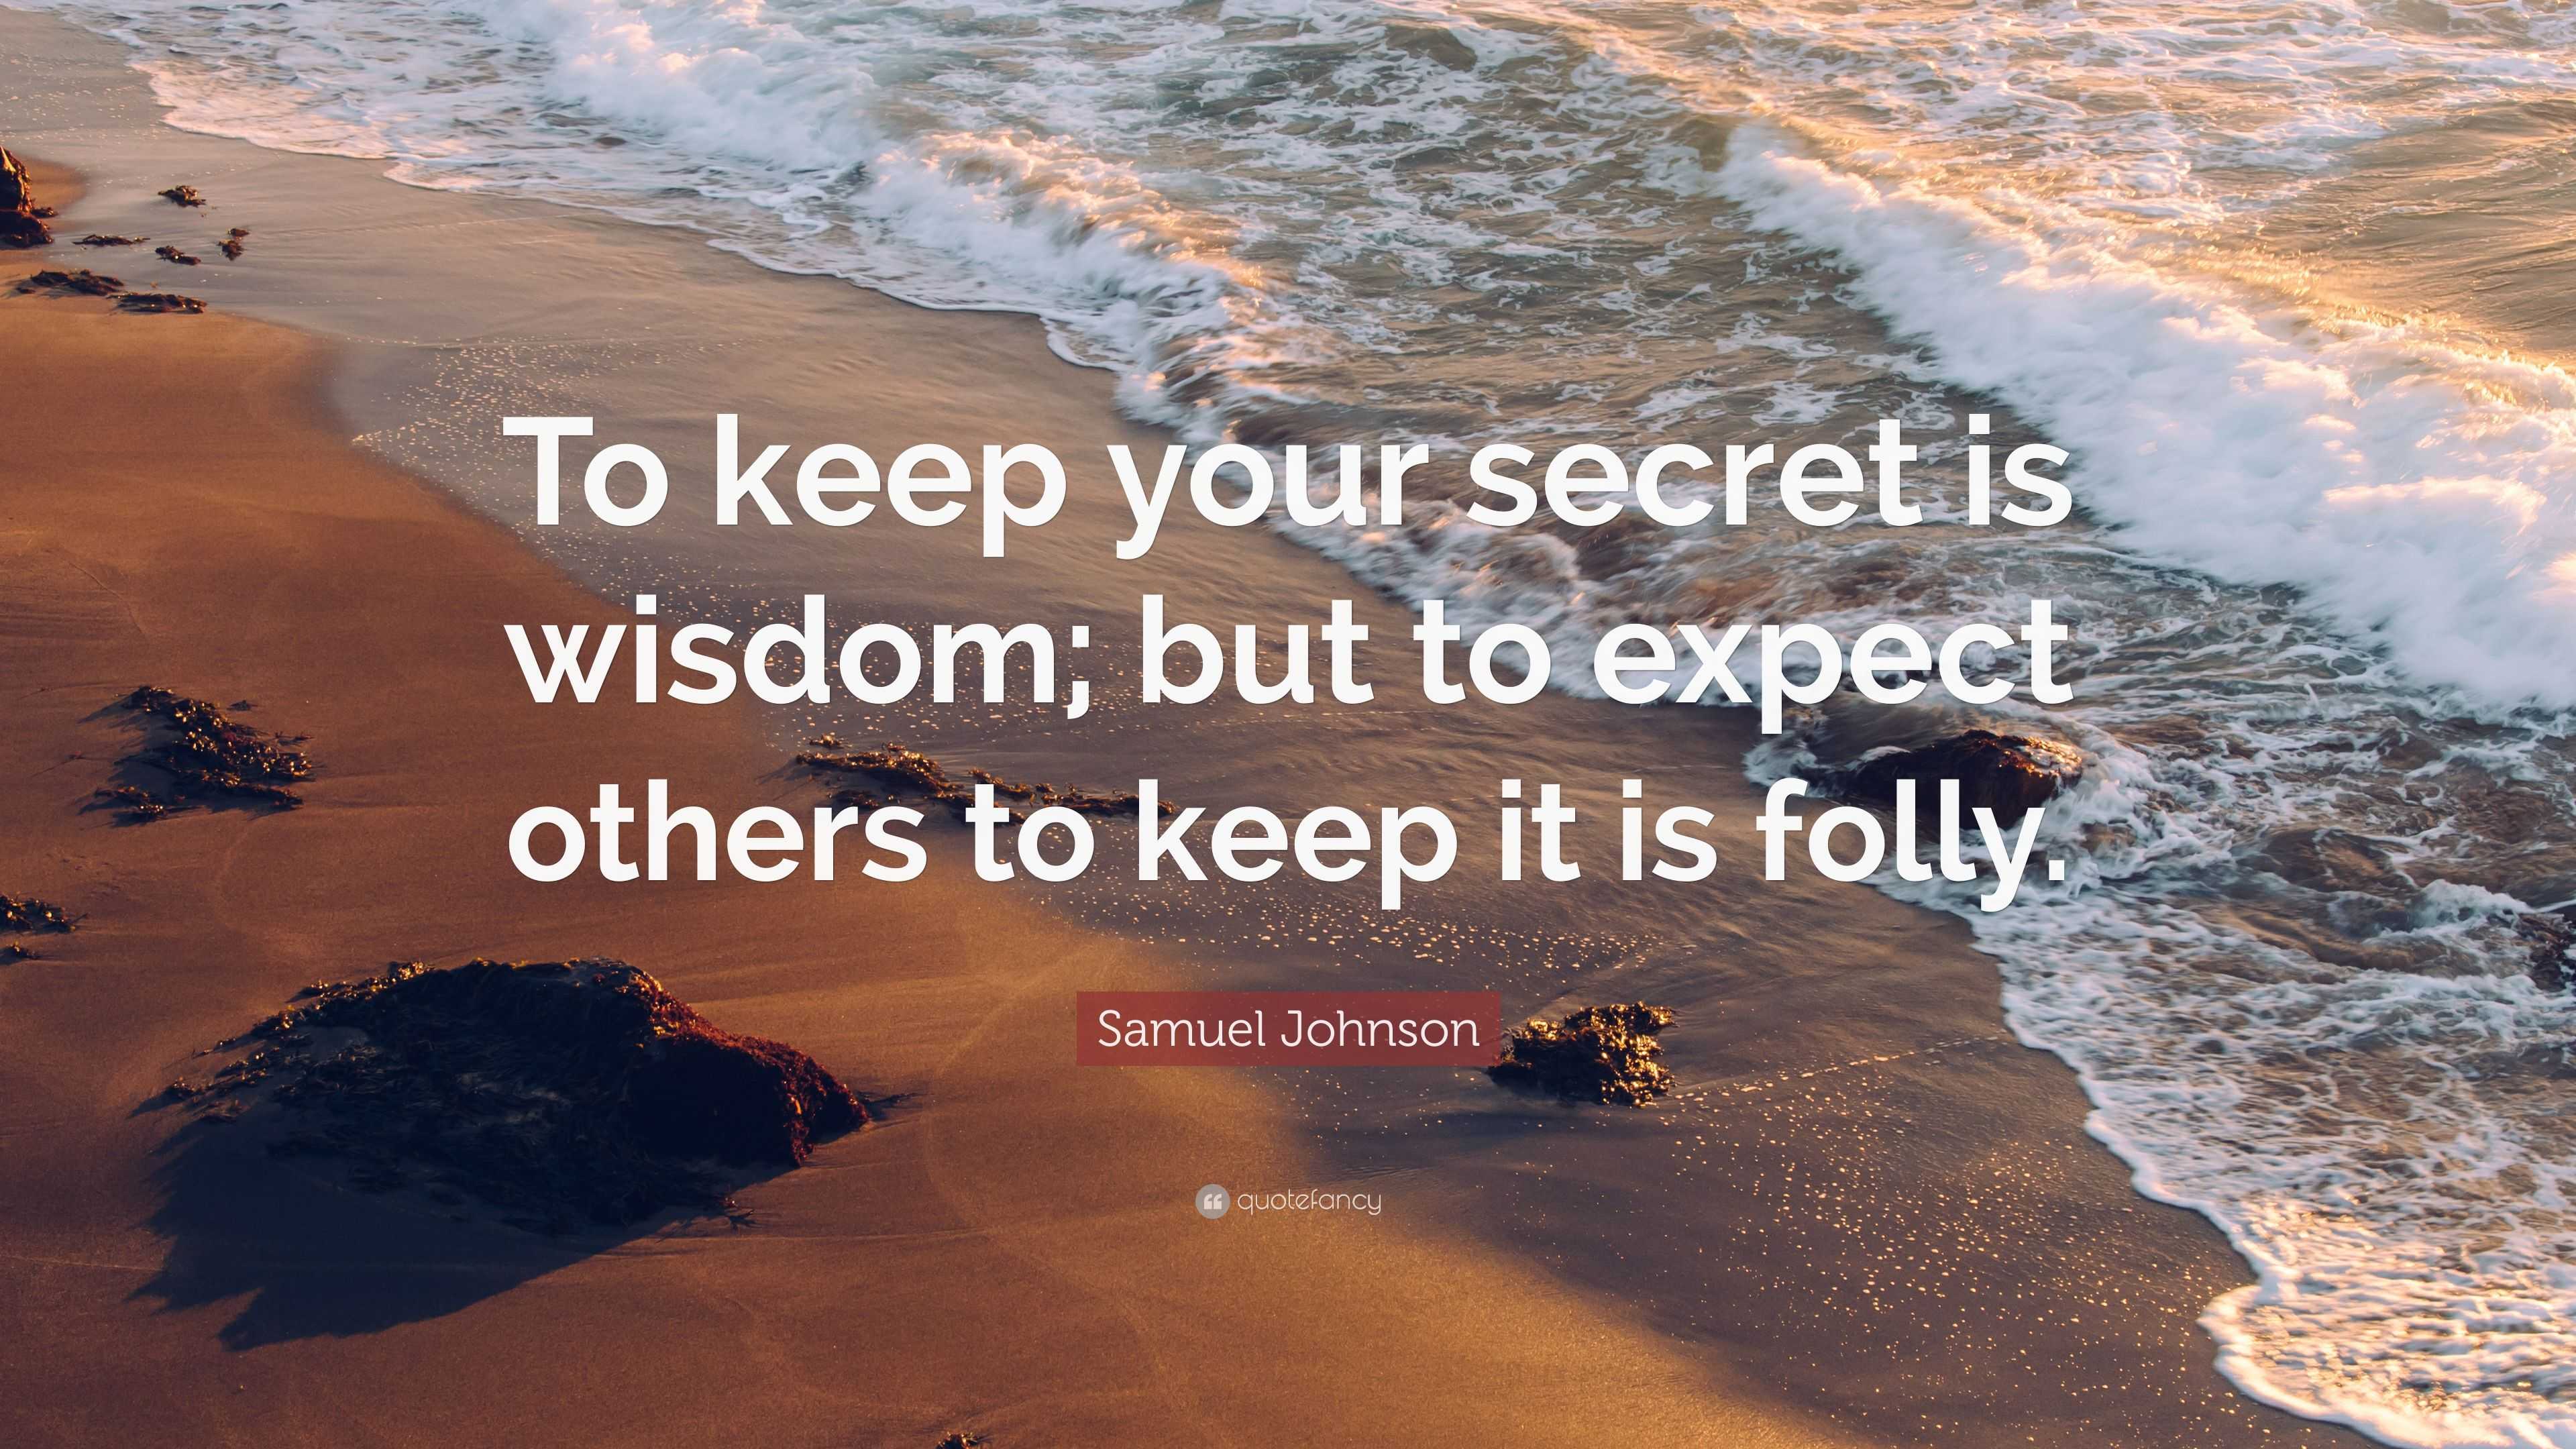 Samuel Johnson Quote: “To keep your secret is wisdom; but to expect